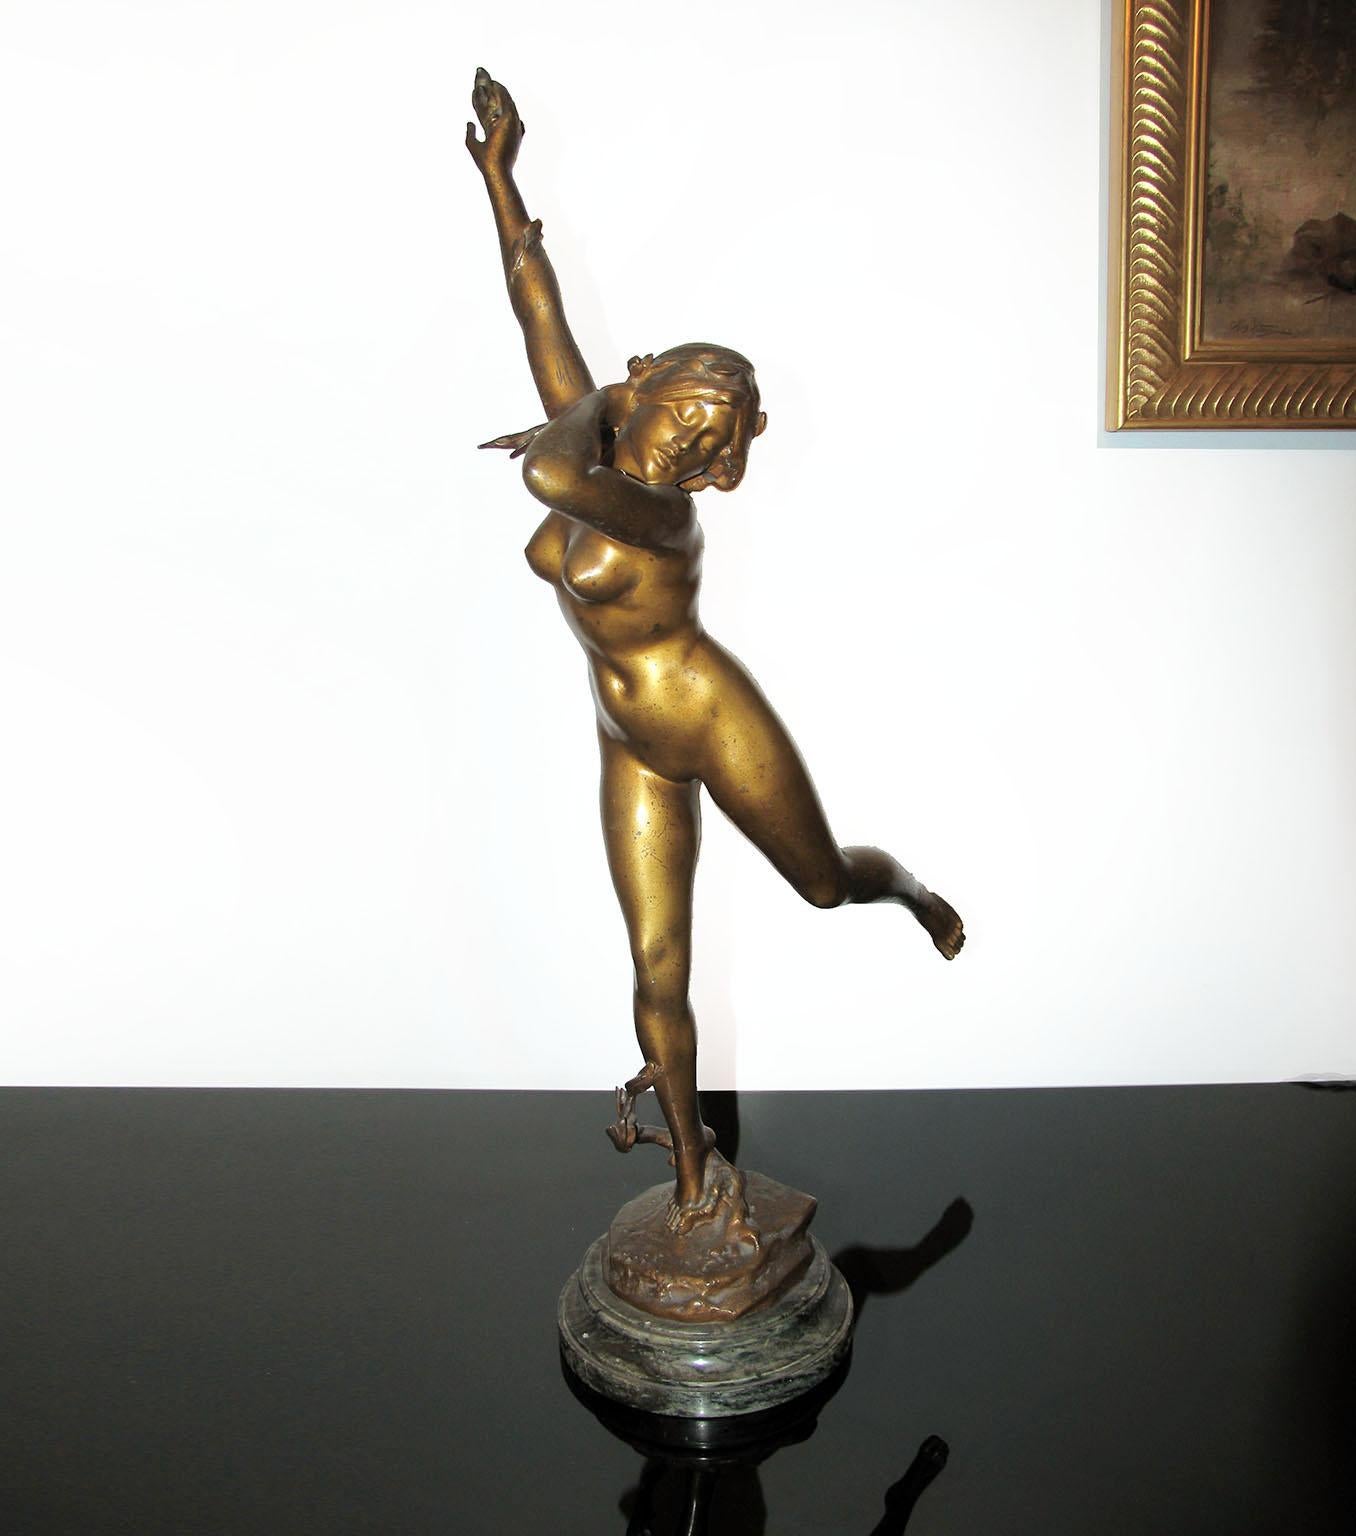 Jules Alfred Alexandre Dercheu (1864-1912), Daphné followed by Apollo.

Bronze statuette with yellow, brown and gold patina, signed to the base, mounted on a round plinth of sea-green marble. 
Very good original condition. 
Measures: Height 58